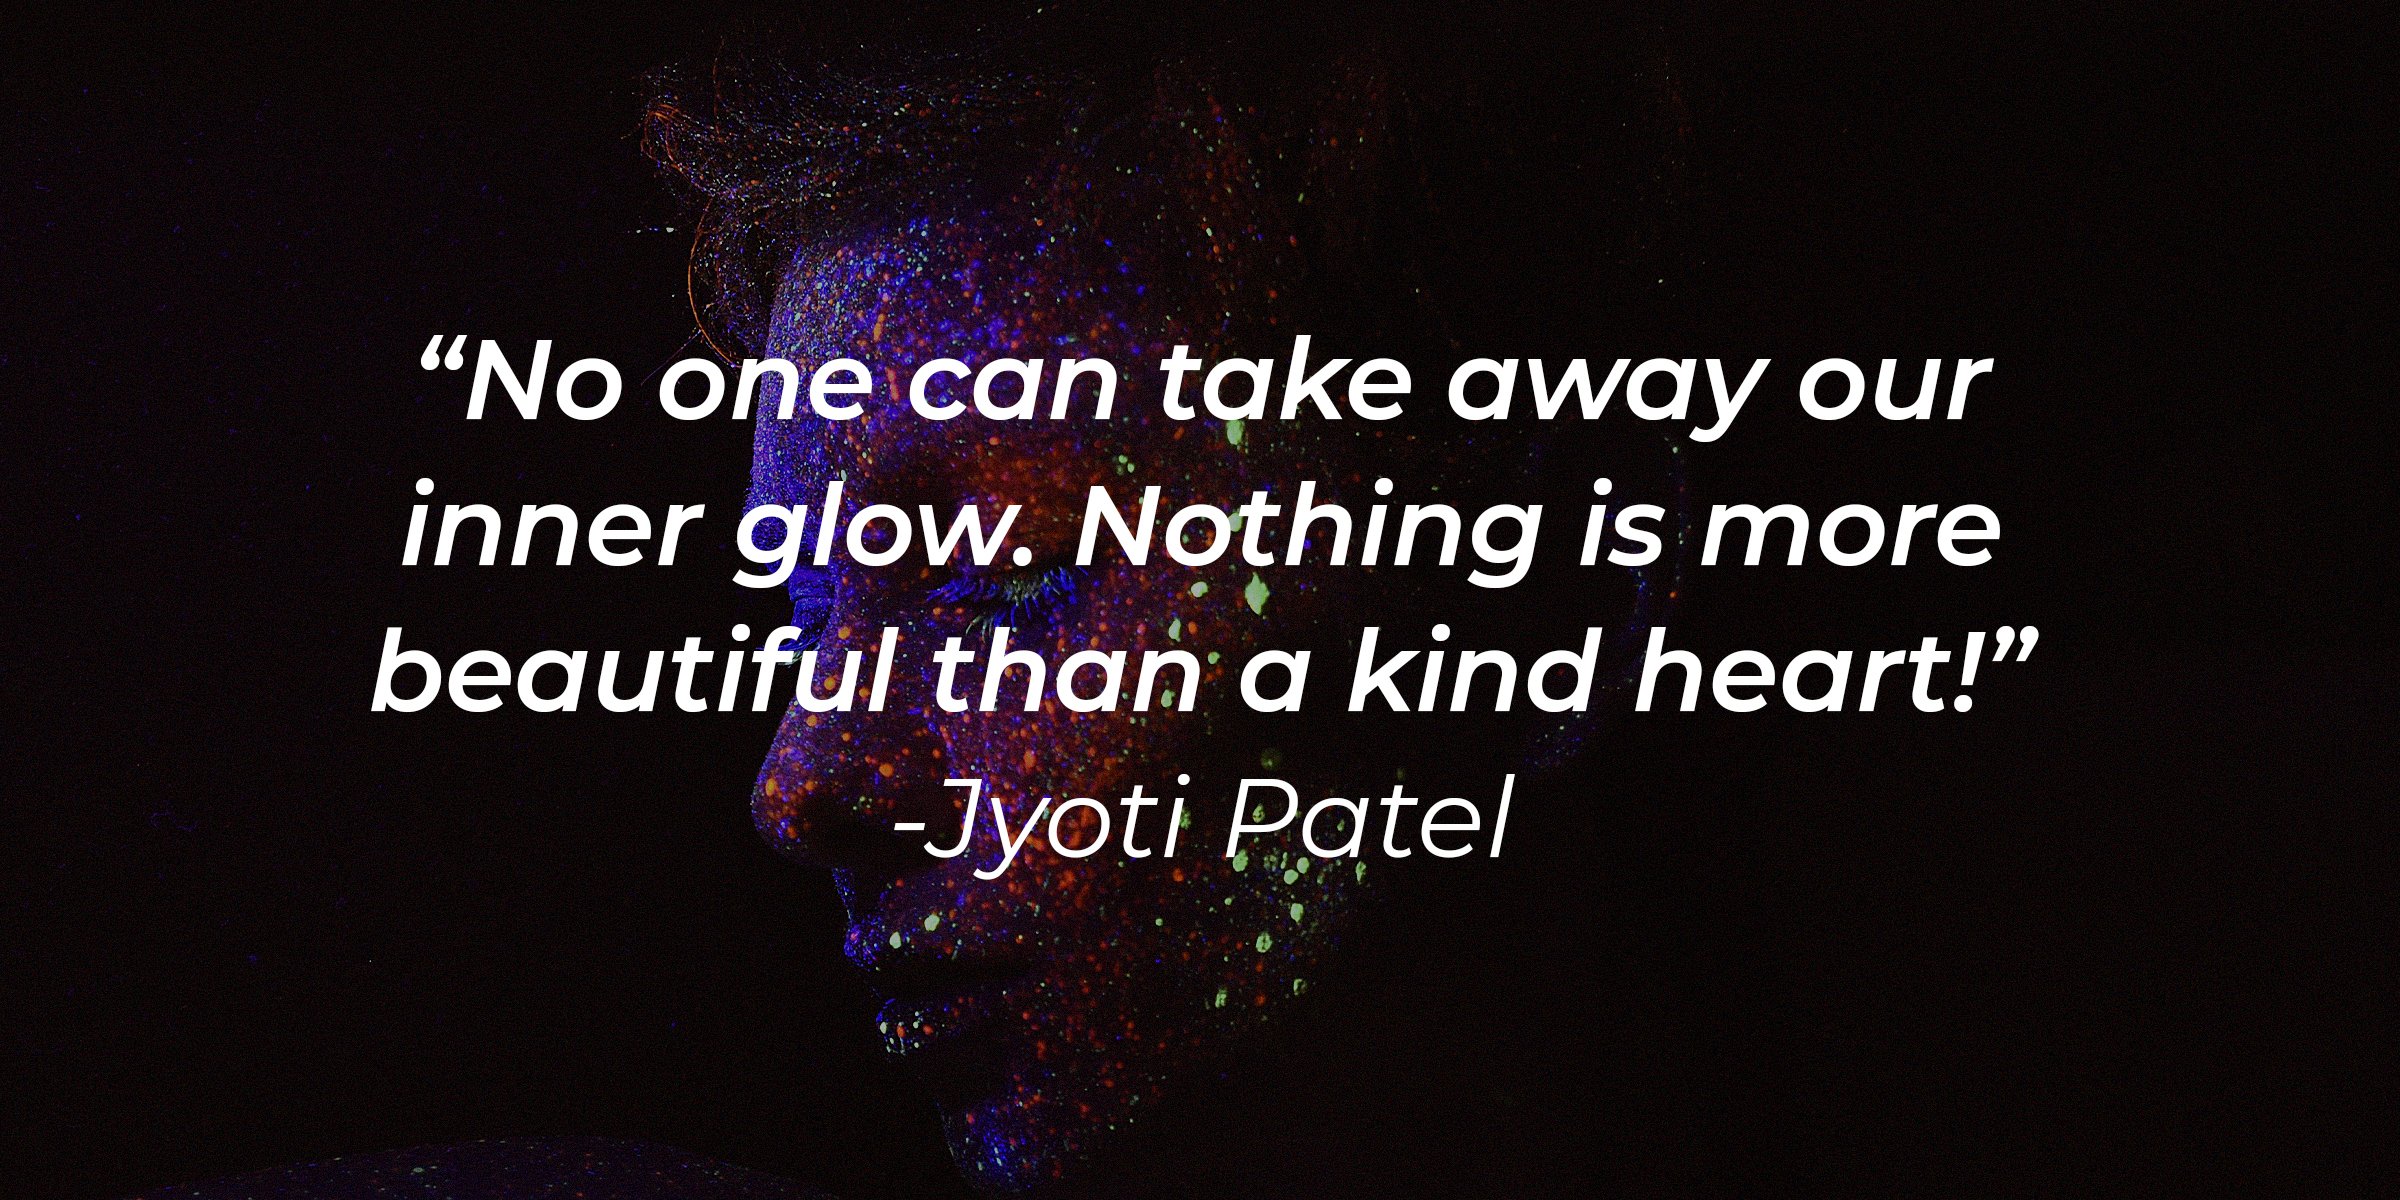 Unsplash | An image of a man with a quote "No one can take away our inner glow. Nothing is more beautiful than a kind heart!" by Jyoti Patel